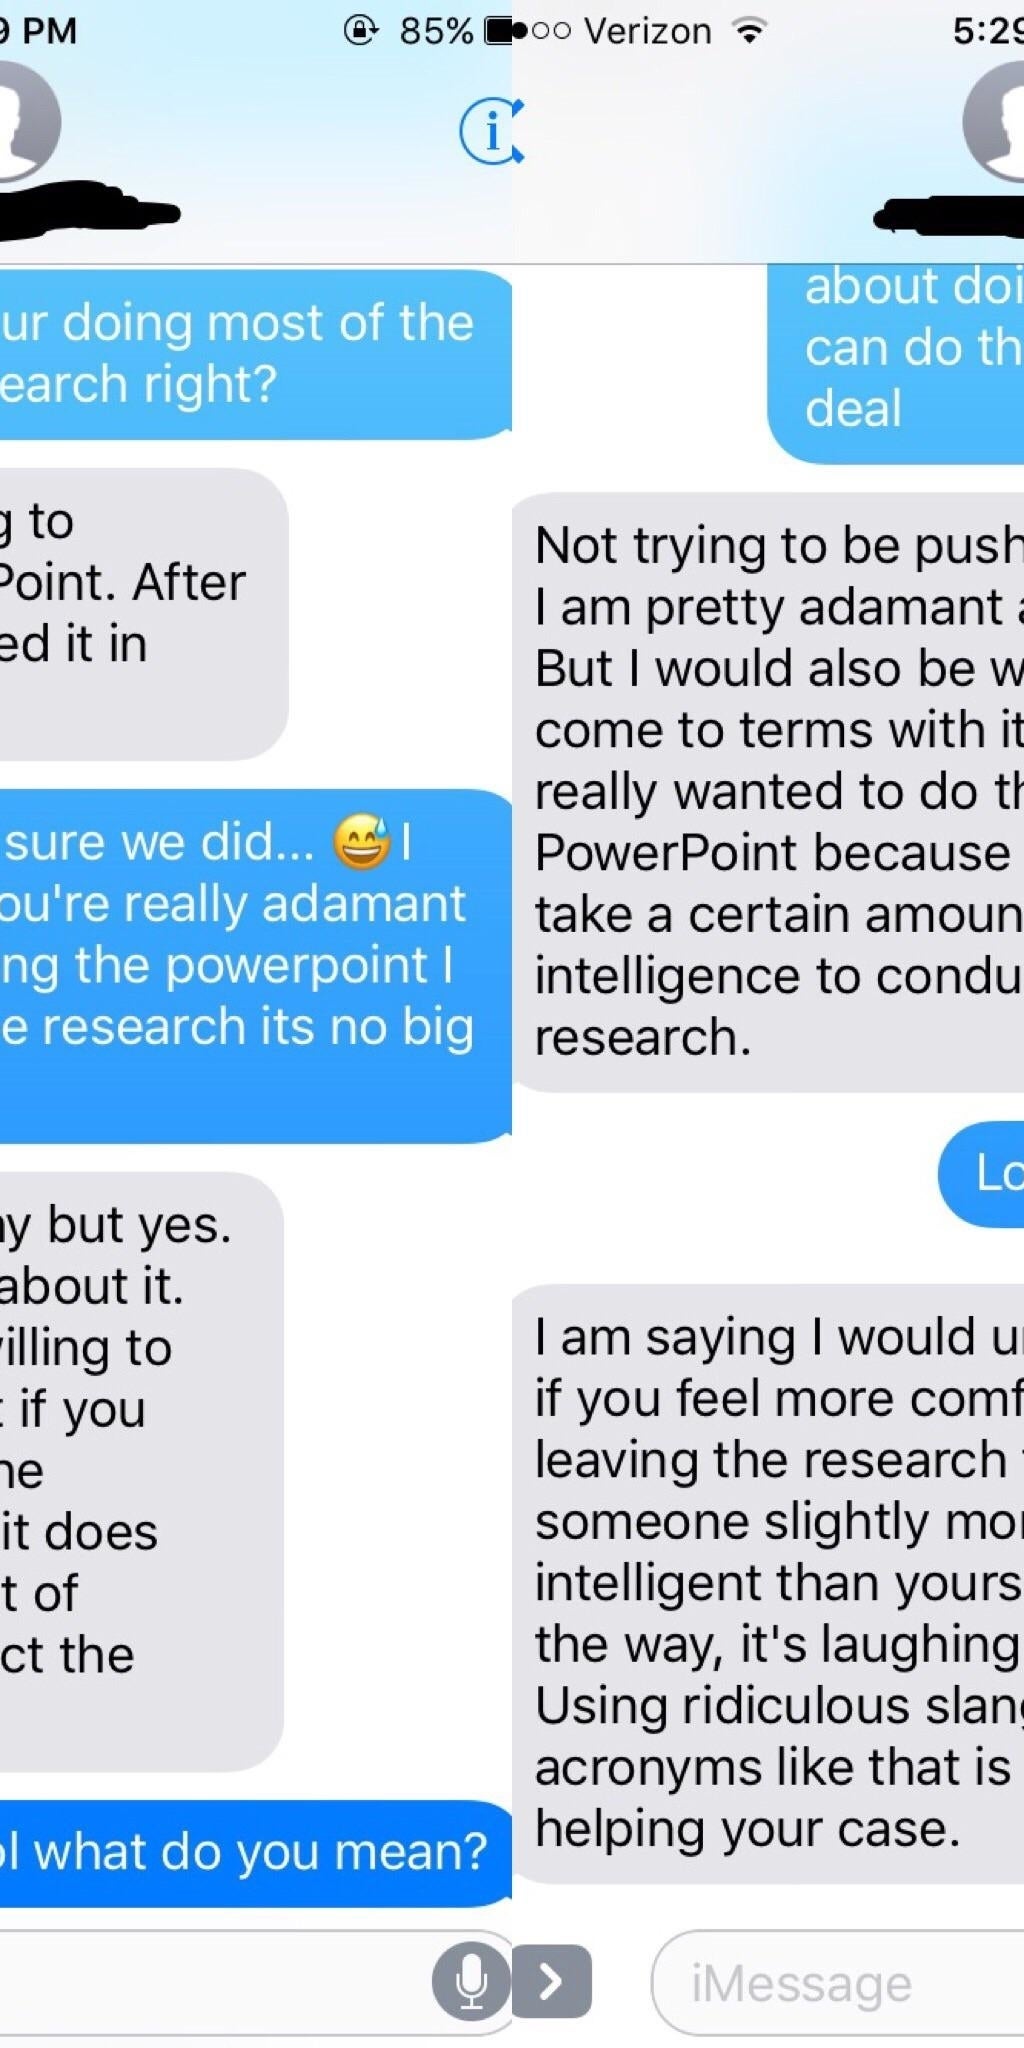 Conversation screenshots from messaging app discussing confusion over who did the majority of work on a PowerPoint research project